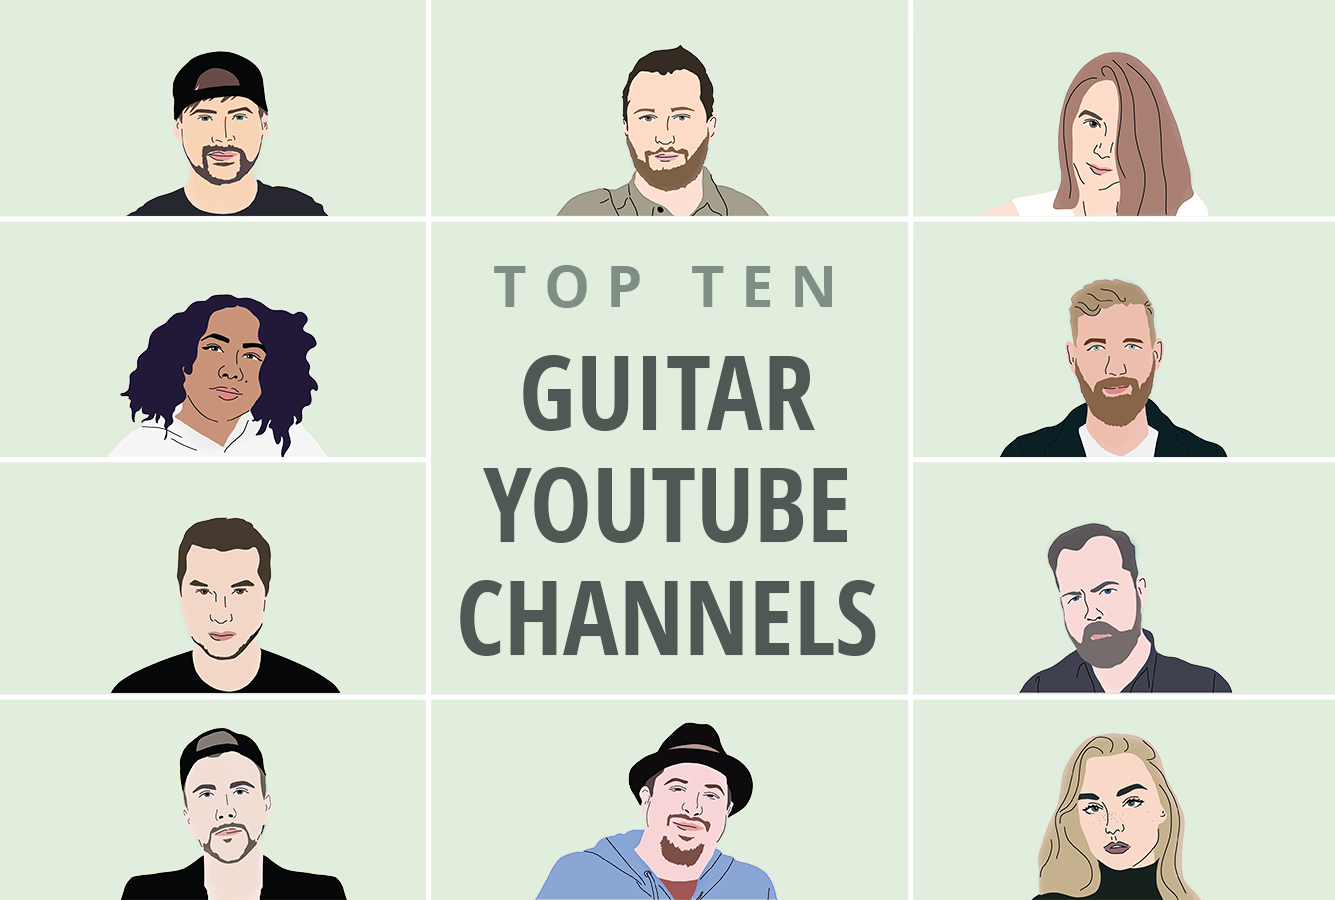 10 Guitar YouTube Channels To Watch